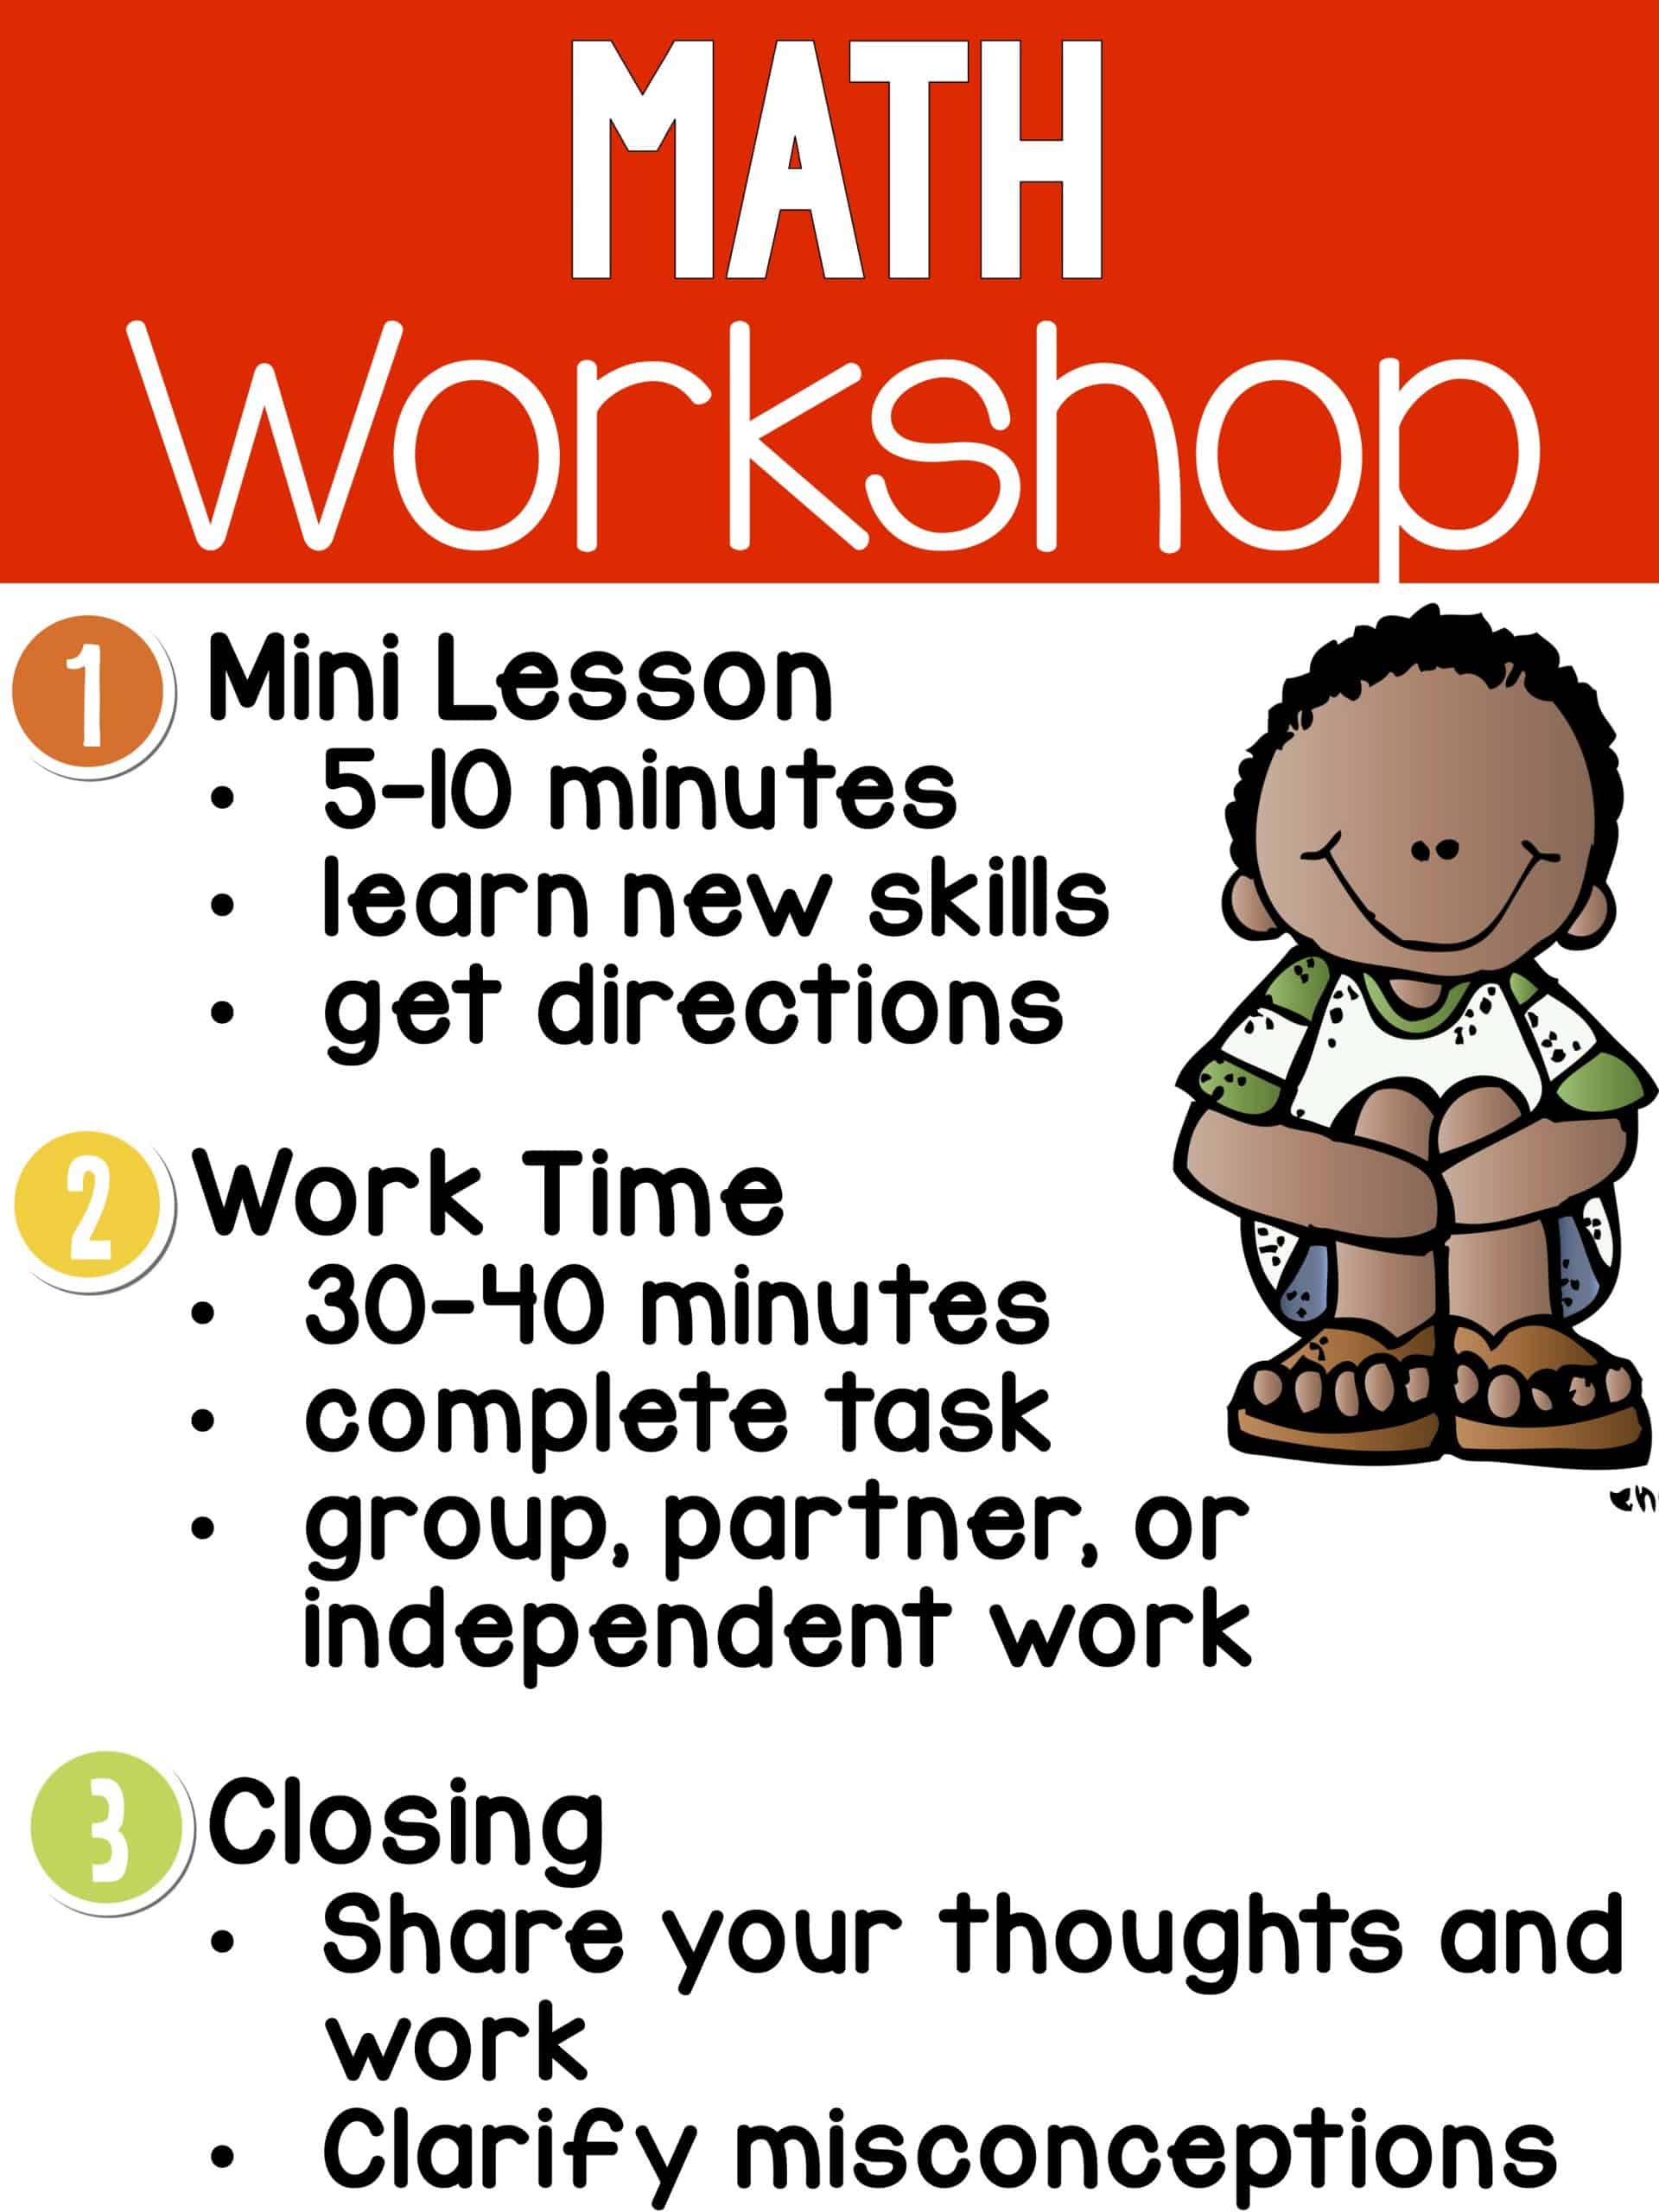 Math workshop steps detailing lesson time, work time, and closing thoughts